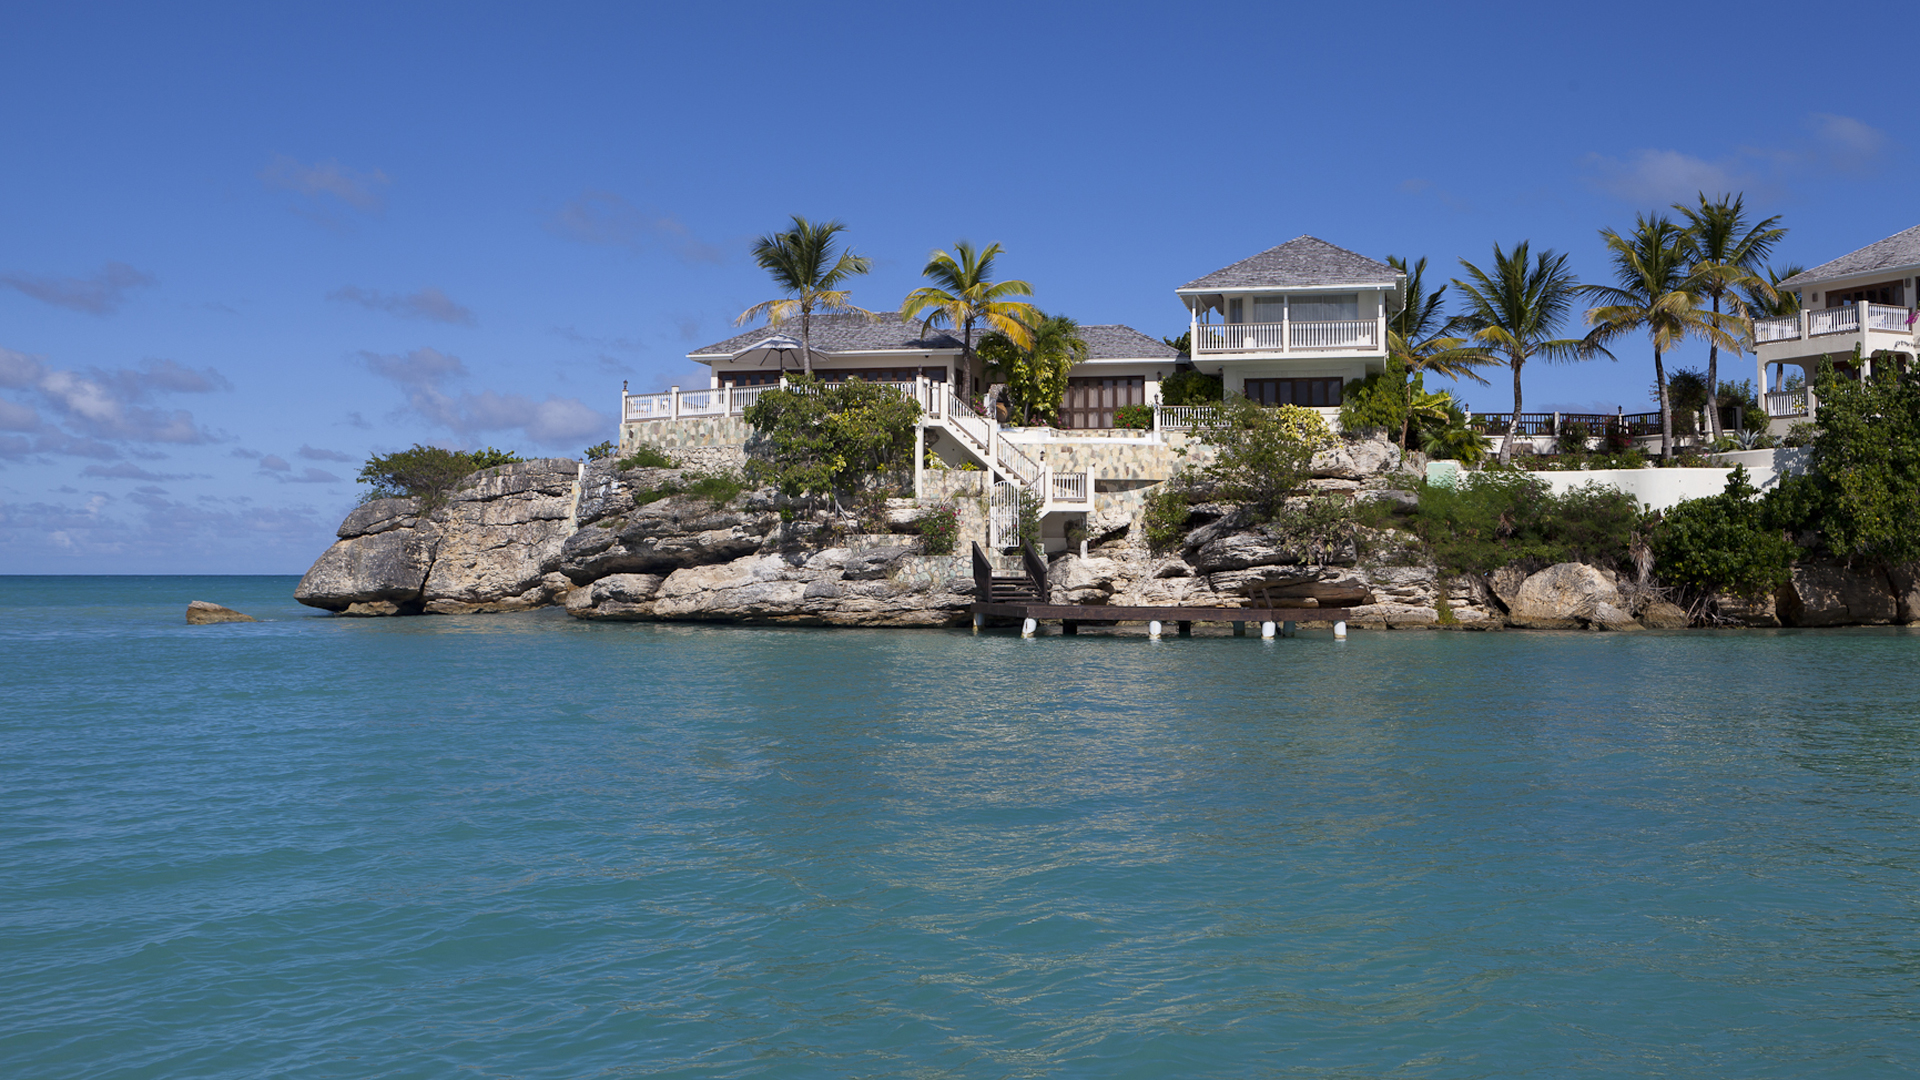  The Cove Suites at Blue Waters, Antigua